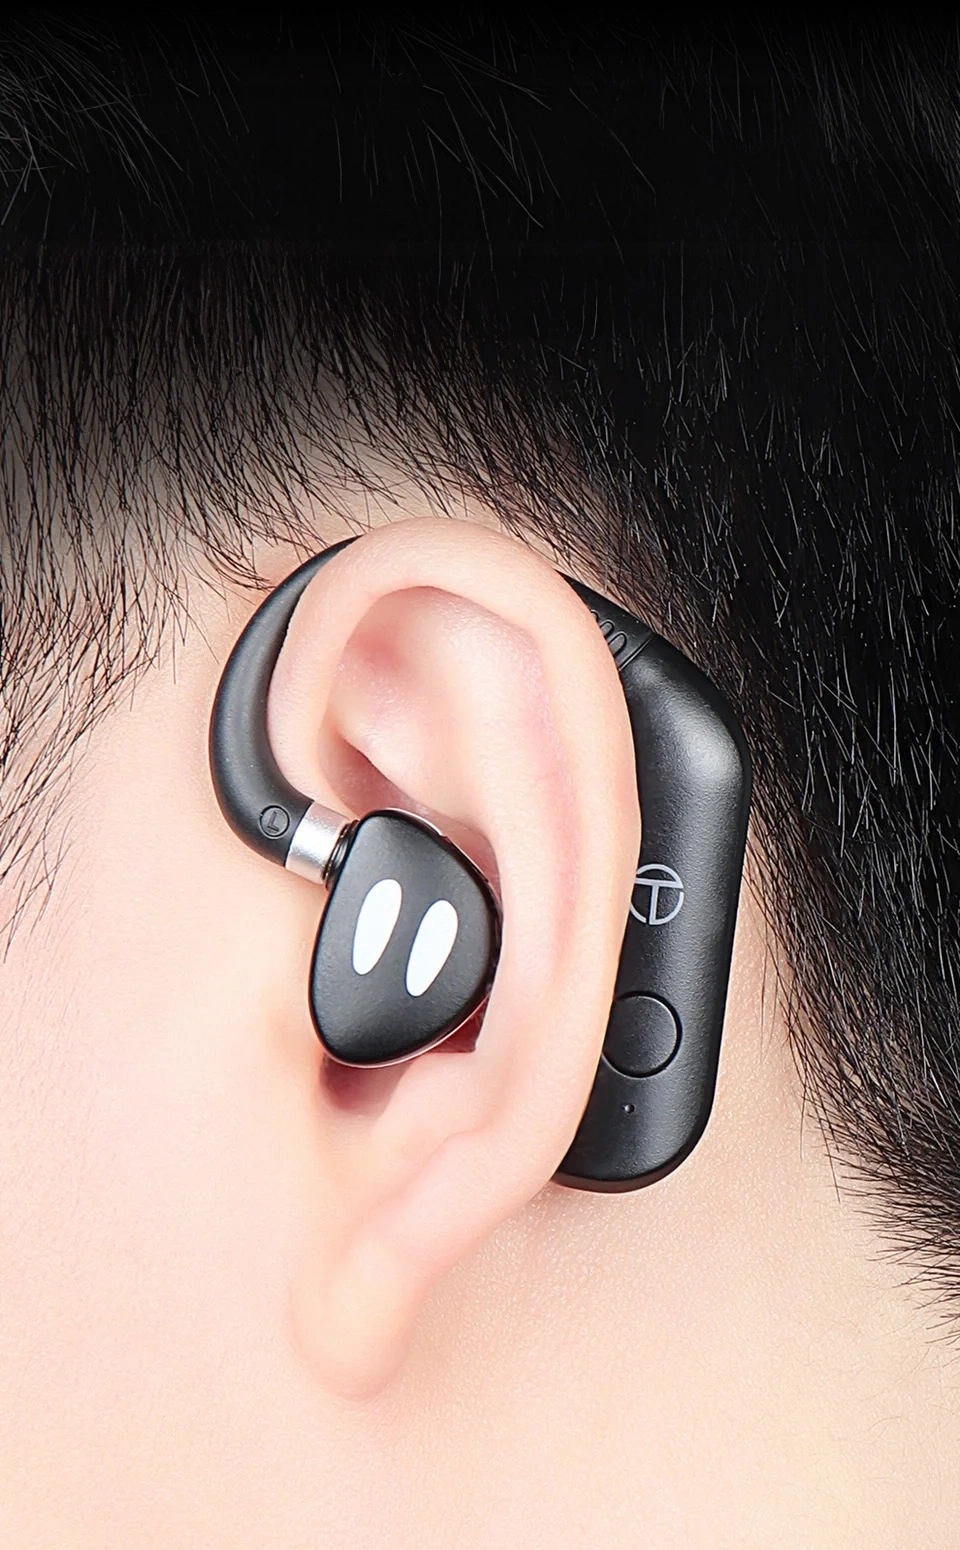 TRN BT20 Pro connected to TRN ORCA in the man's ear